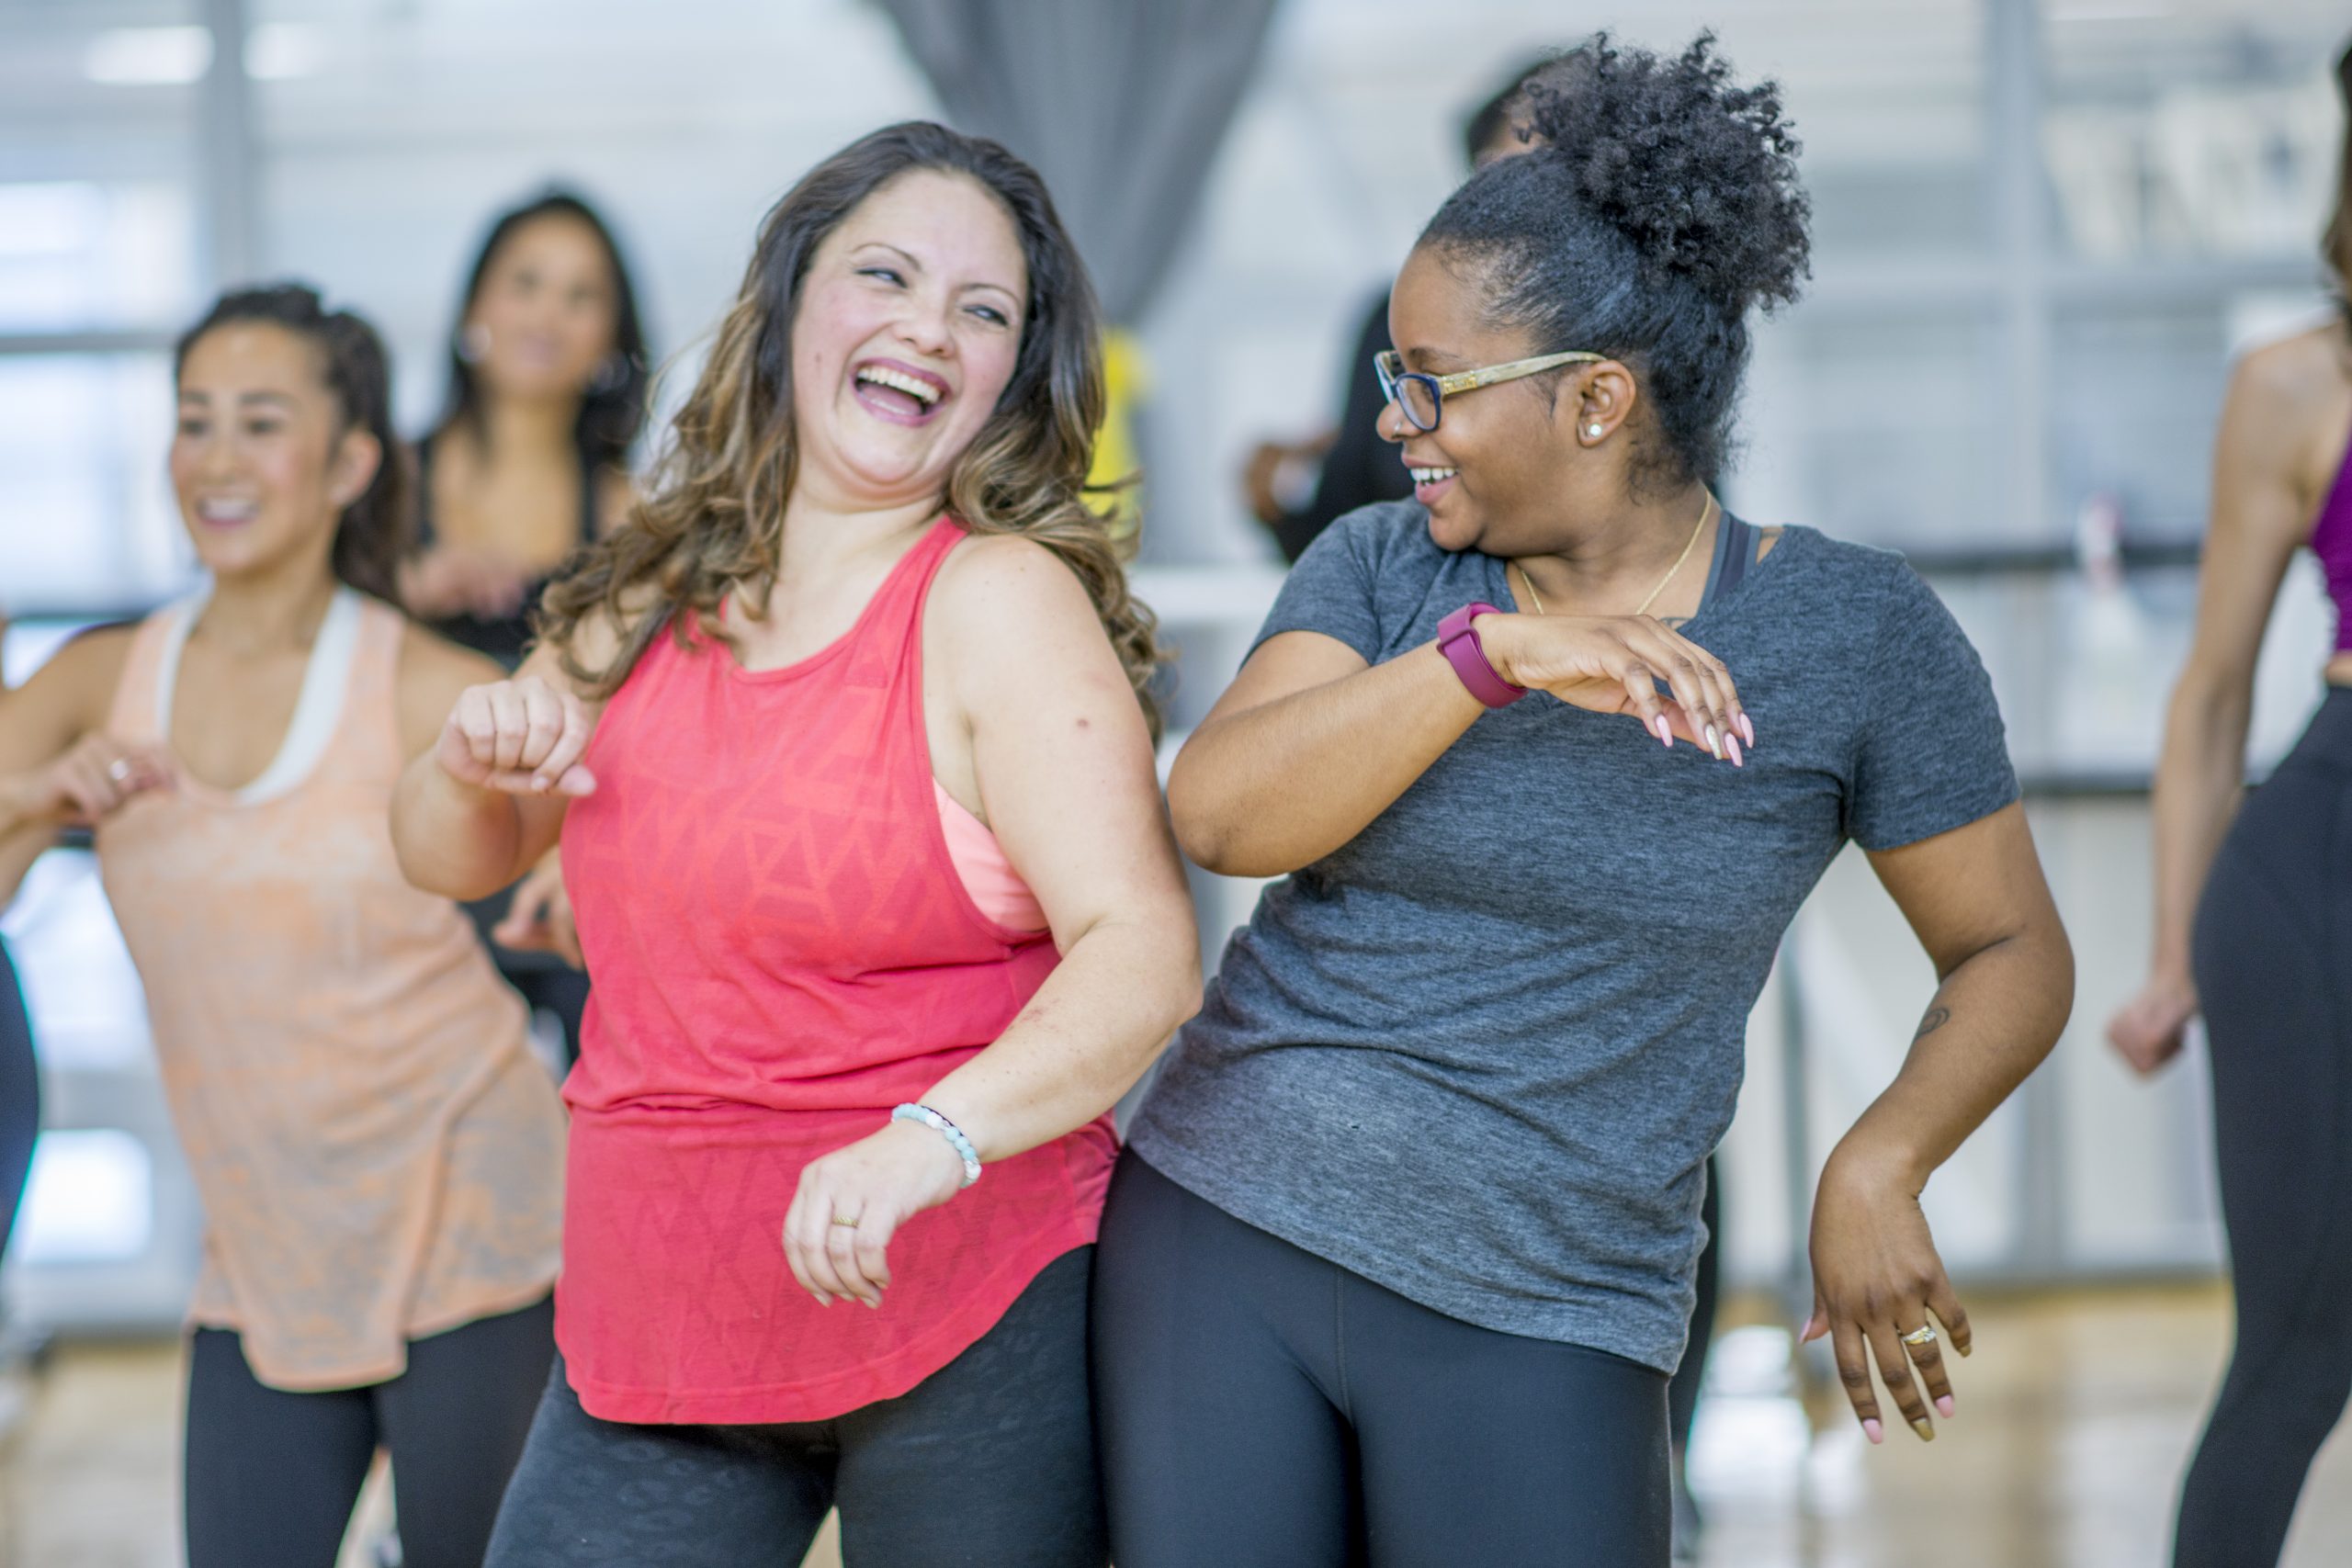 A group of young multi-ethnic women are participating in a Zumba class.  They are all wearing their active wear, smiling and having fun.  The two women in front are bumping hips and sharing a laugh.